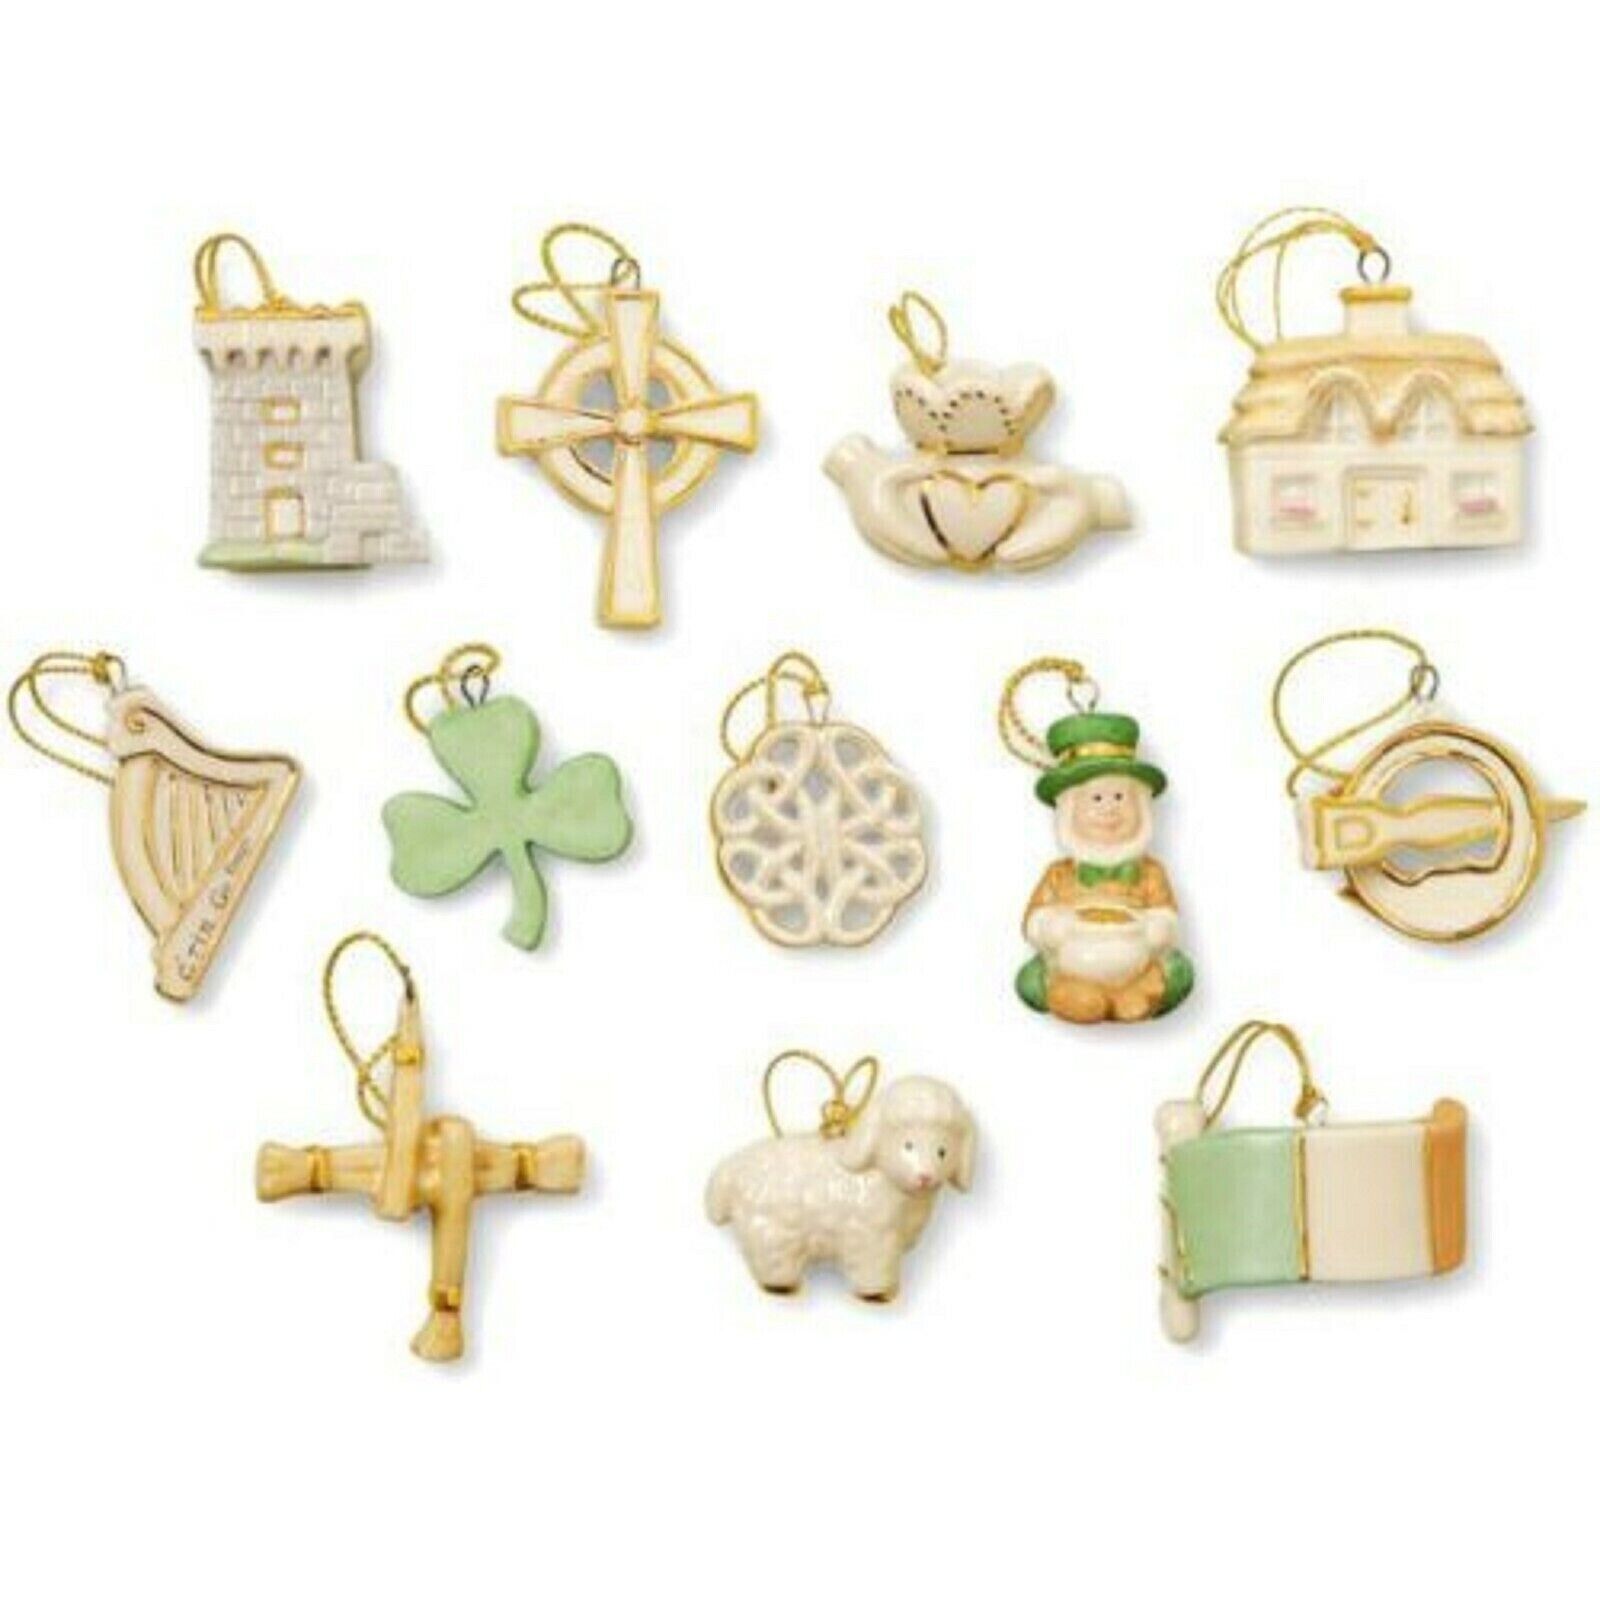 Lenox Luck Of The Irish Miniature Ornaments Complete With Box